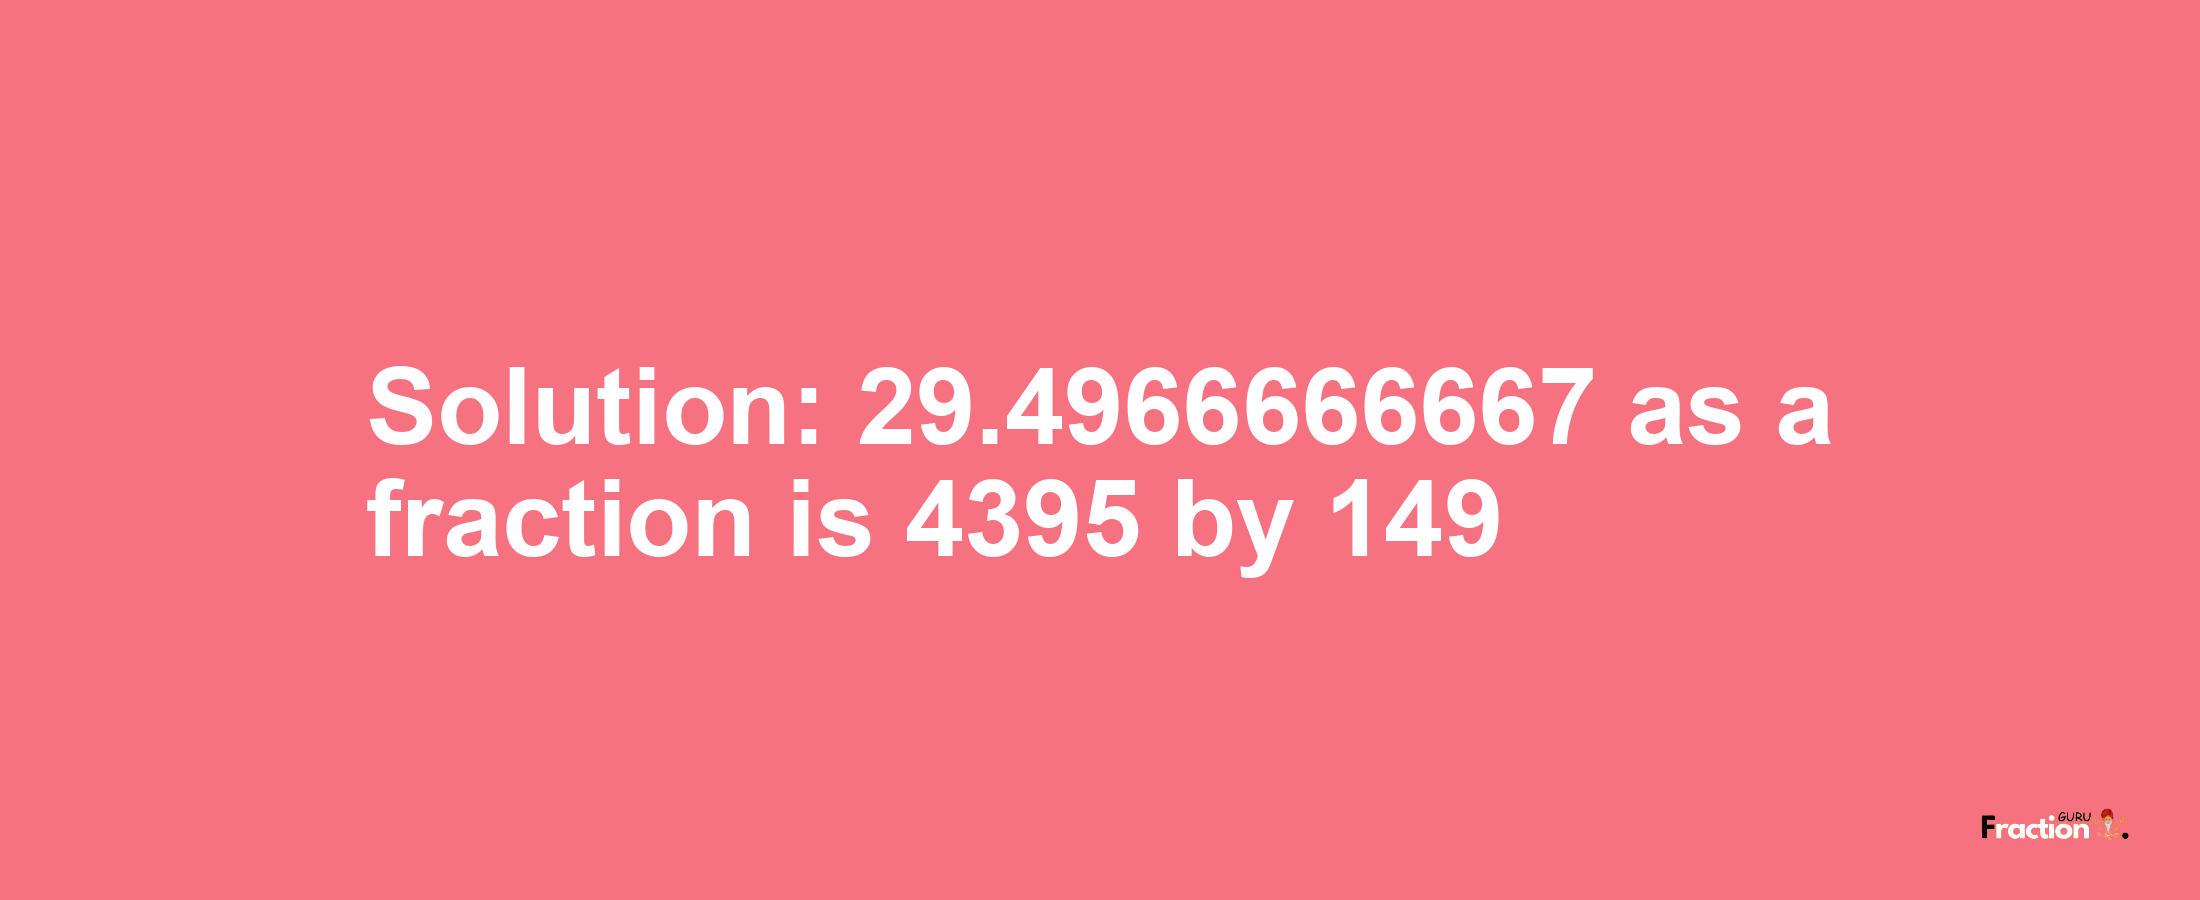 Solution:29.4966666667 as a fraction is 4395/149